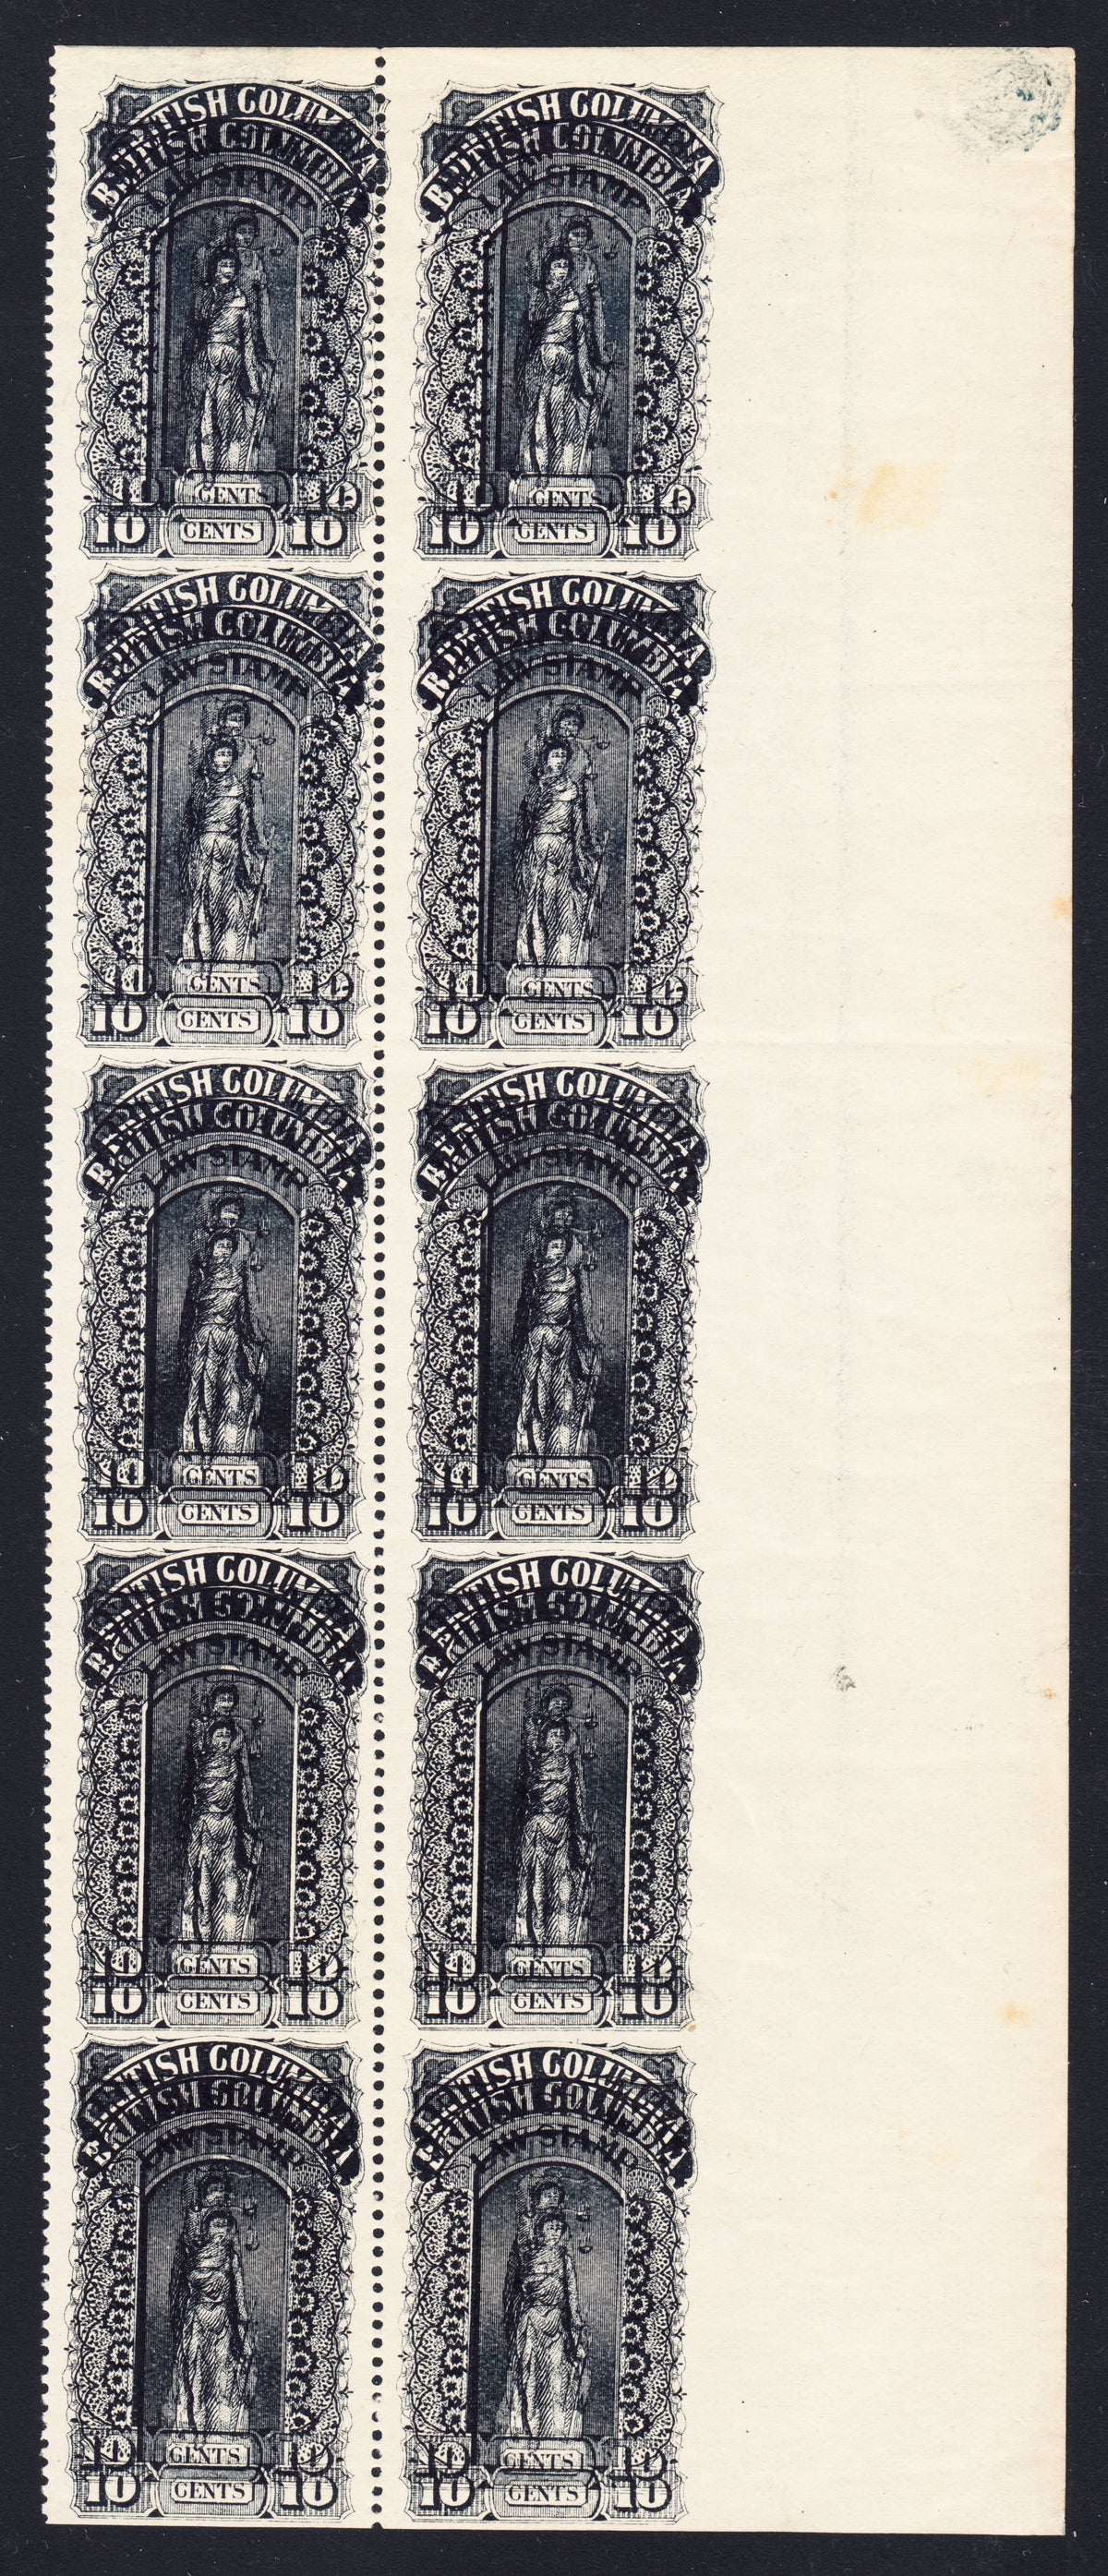 0016BC2204 - BCL16c,d - Imperforate, Double Print Block of 10